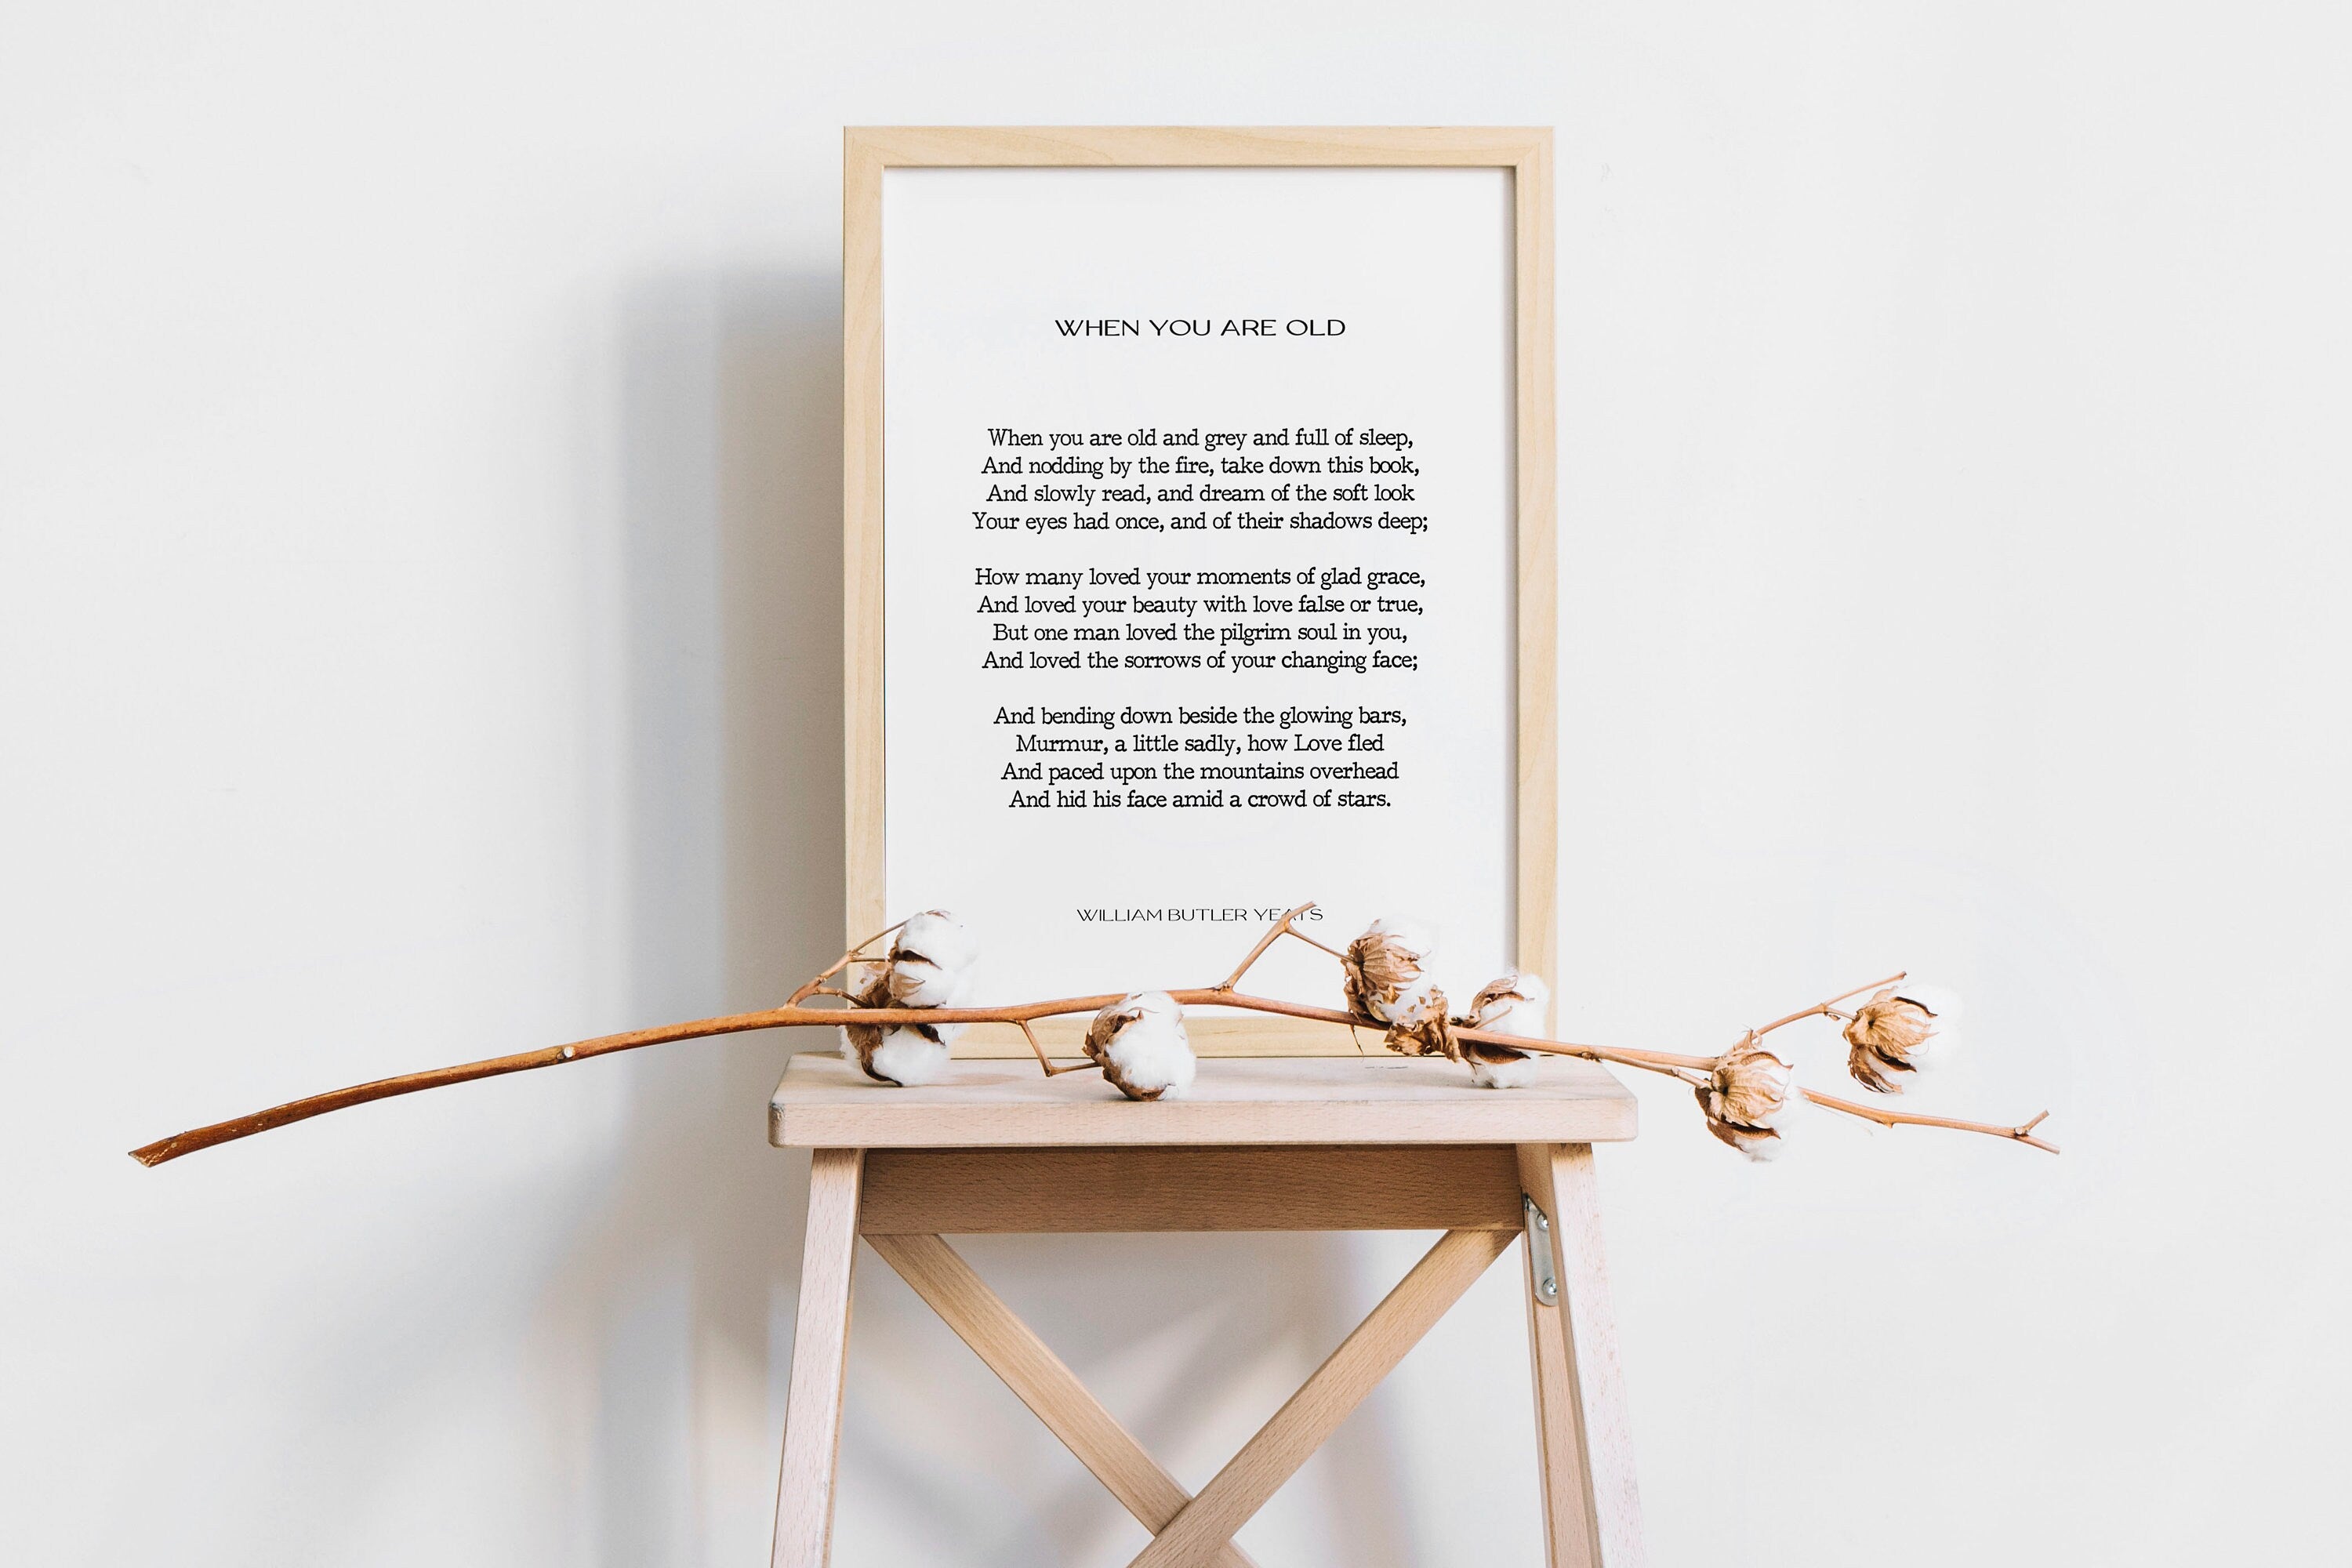 W B Yeats, When You Are Old Anniversary Gift, Love Poem, Poetry Quote Art, Romantic Wall Print, Bedroom Decor Love Poem